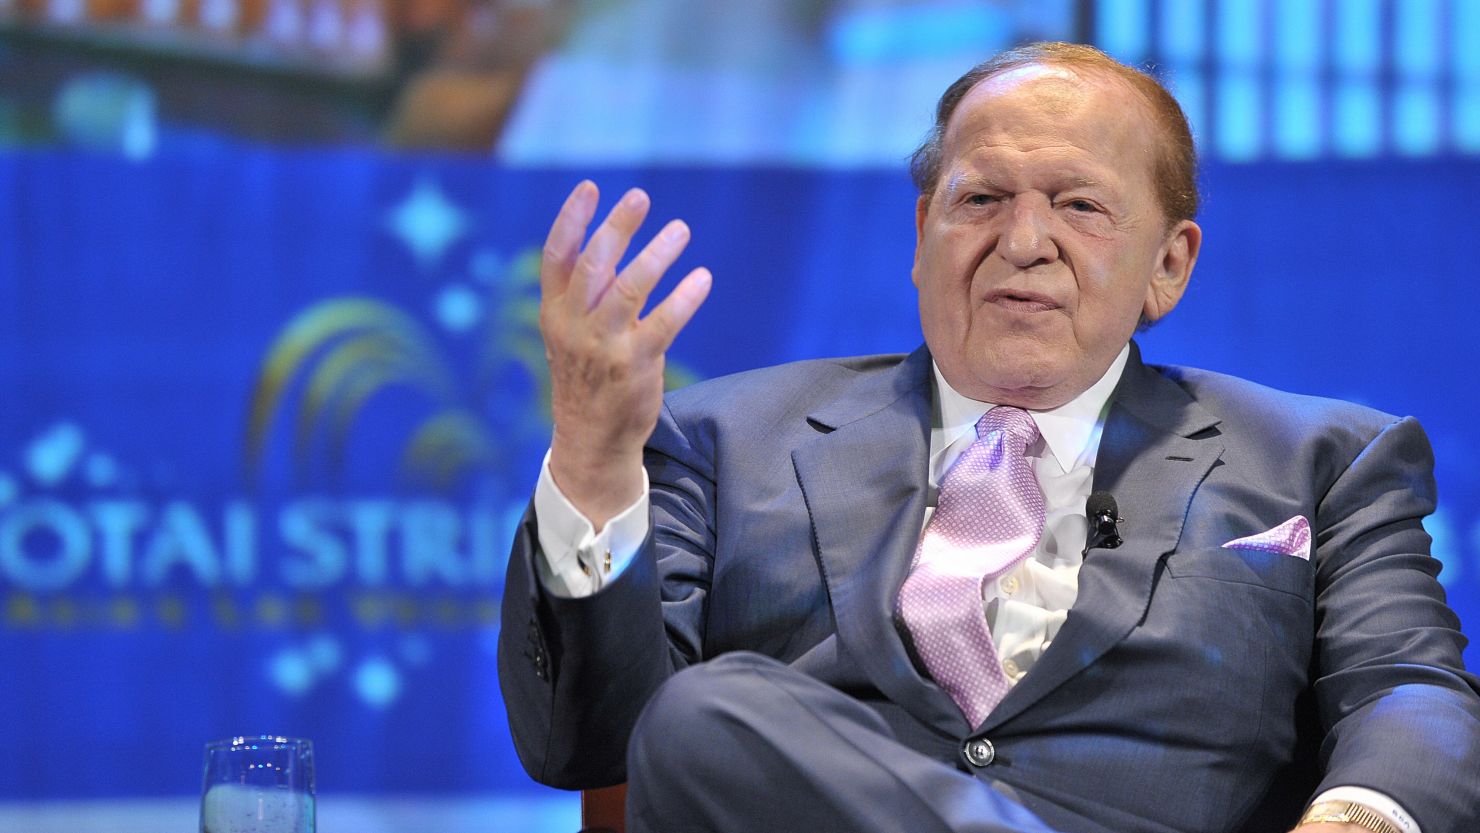 Casino mogul Sheldon Adelson, seen here in 2008, has pumped millions of dollars  into GOP campaigns.